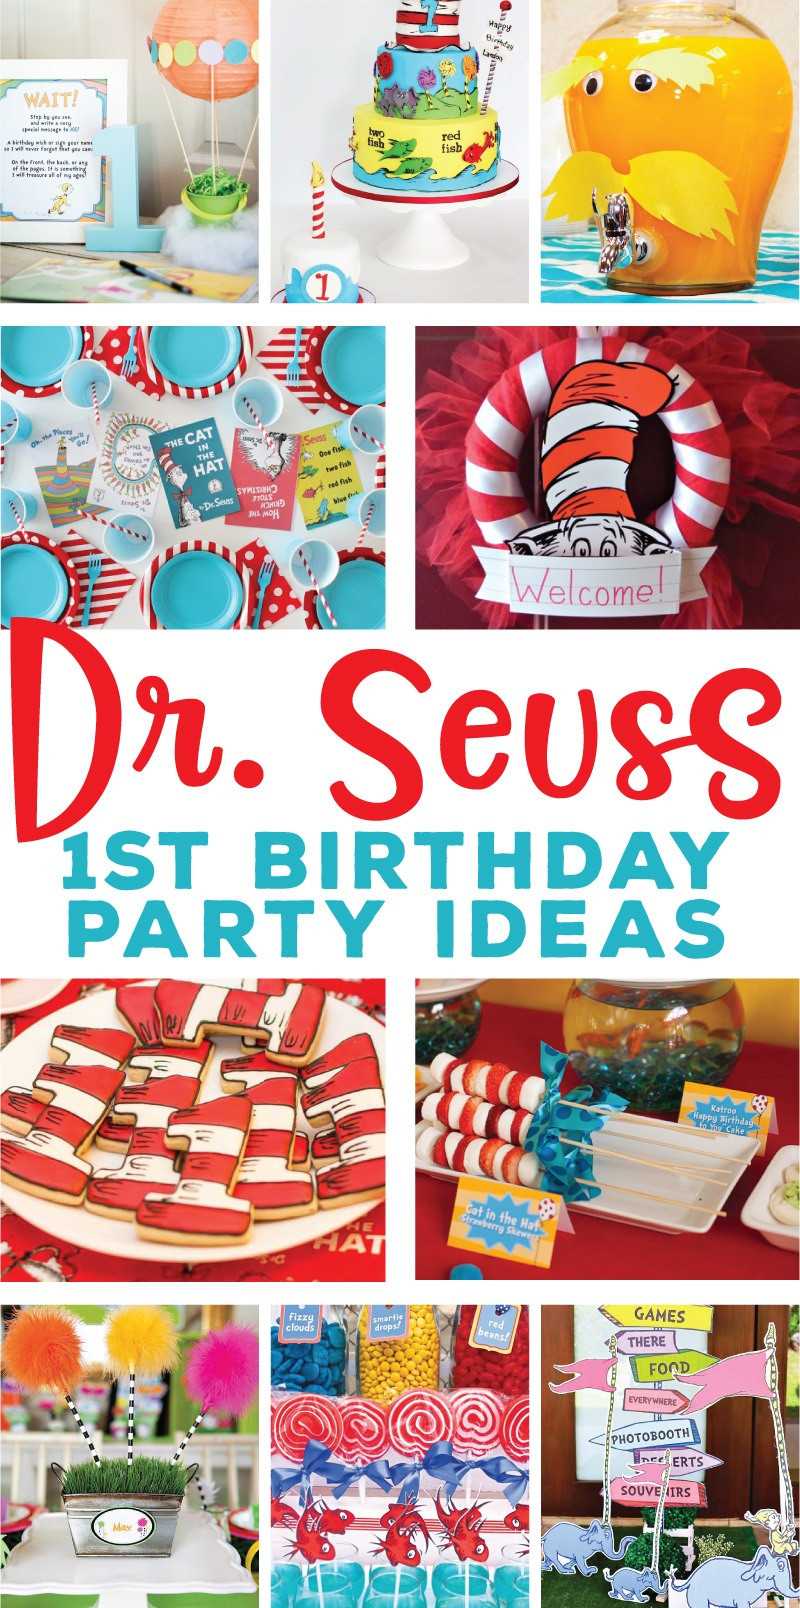 Dr Seuss Birthday Decorations
 The Best Dr Seuss 1st Birthday Party Ideas on Love the Day